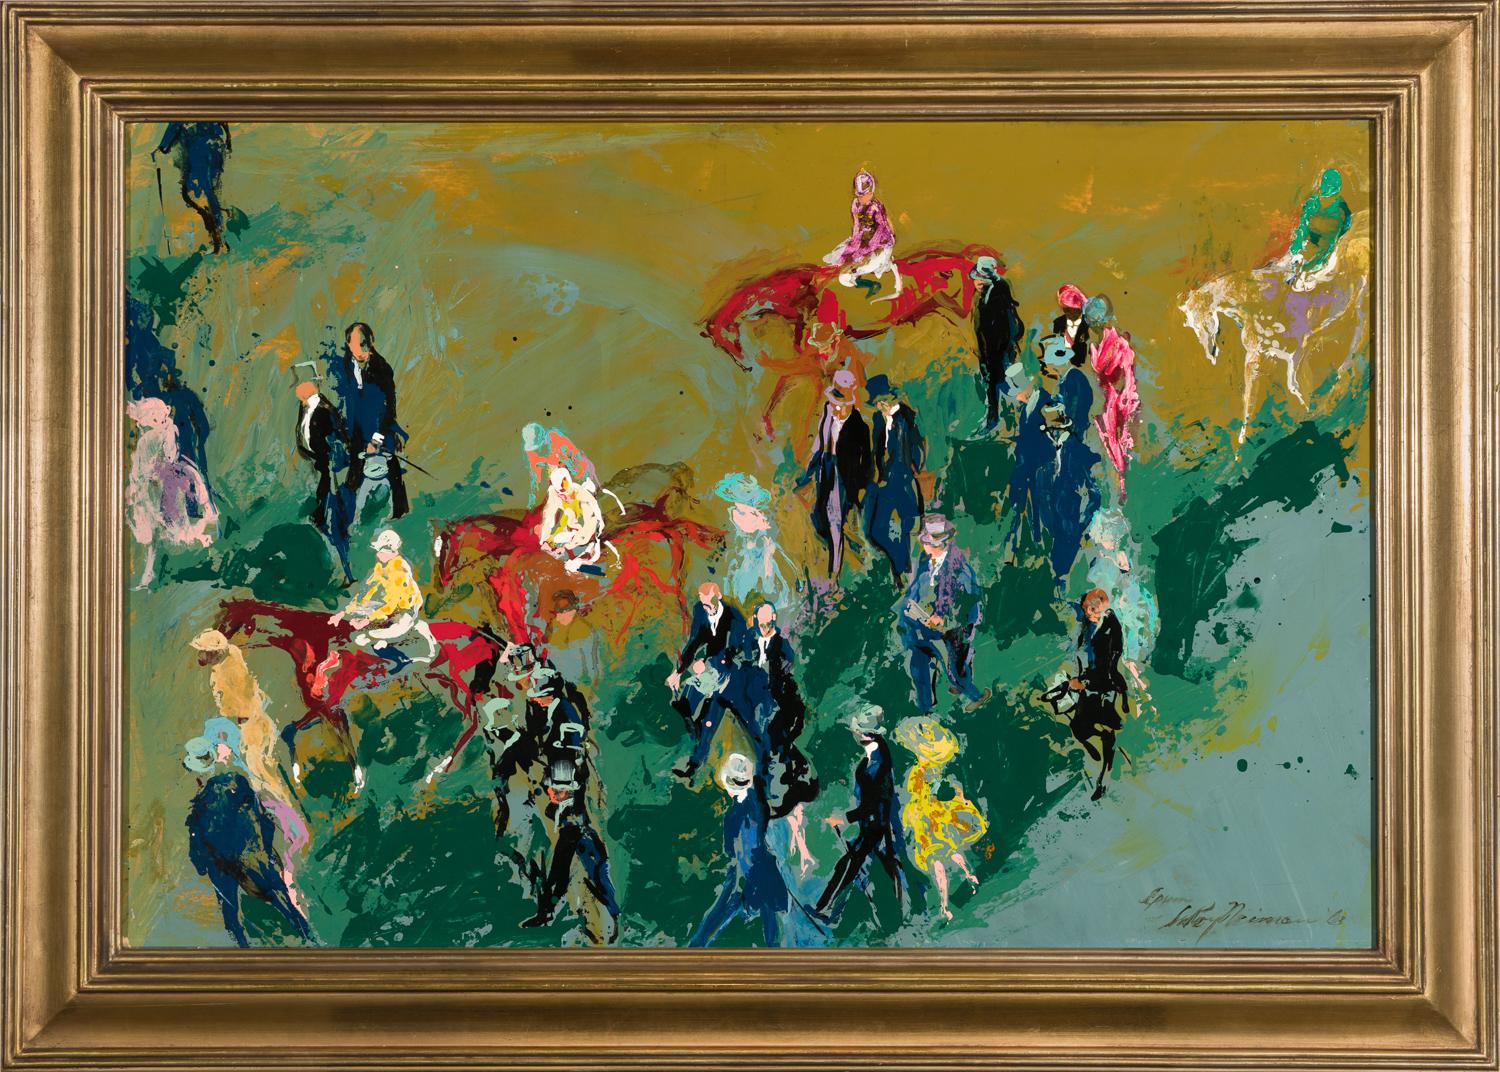 Epsom - Painting by Leroy Neiman